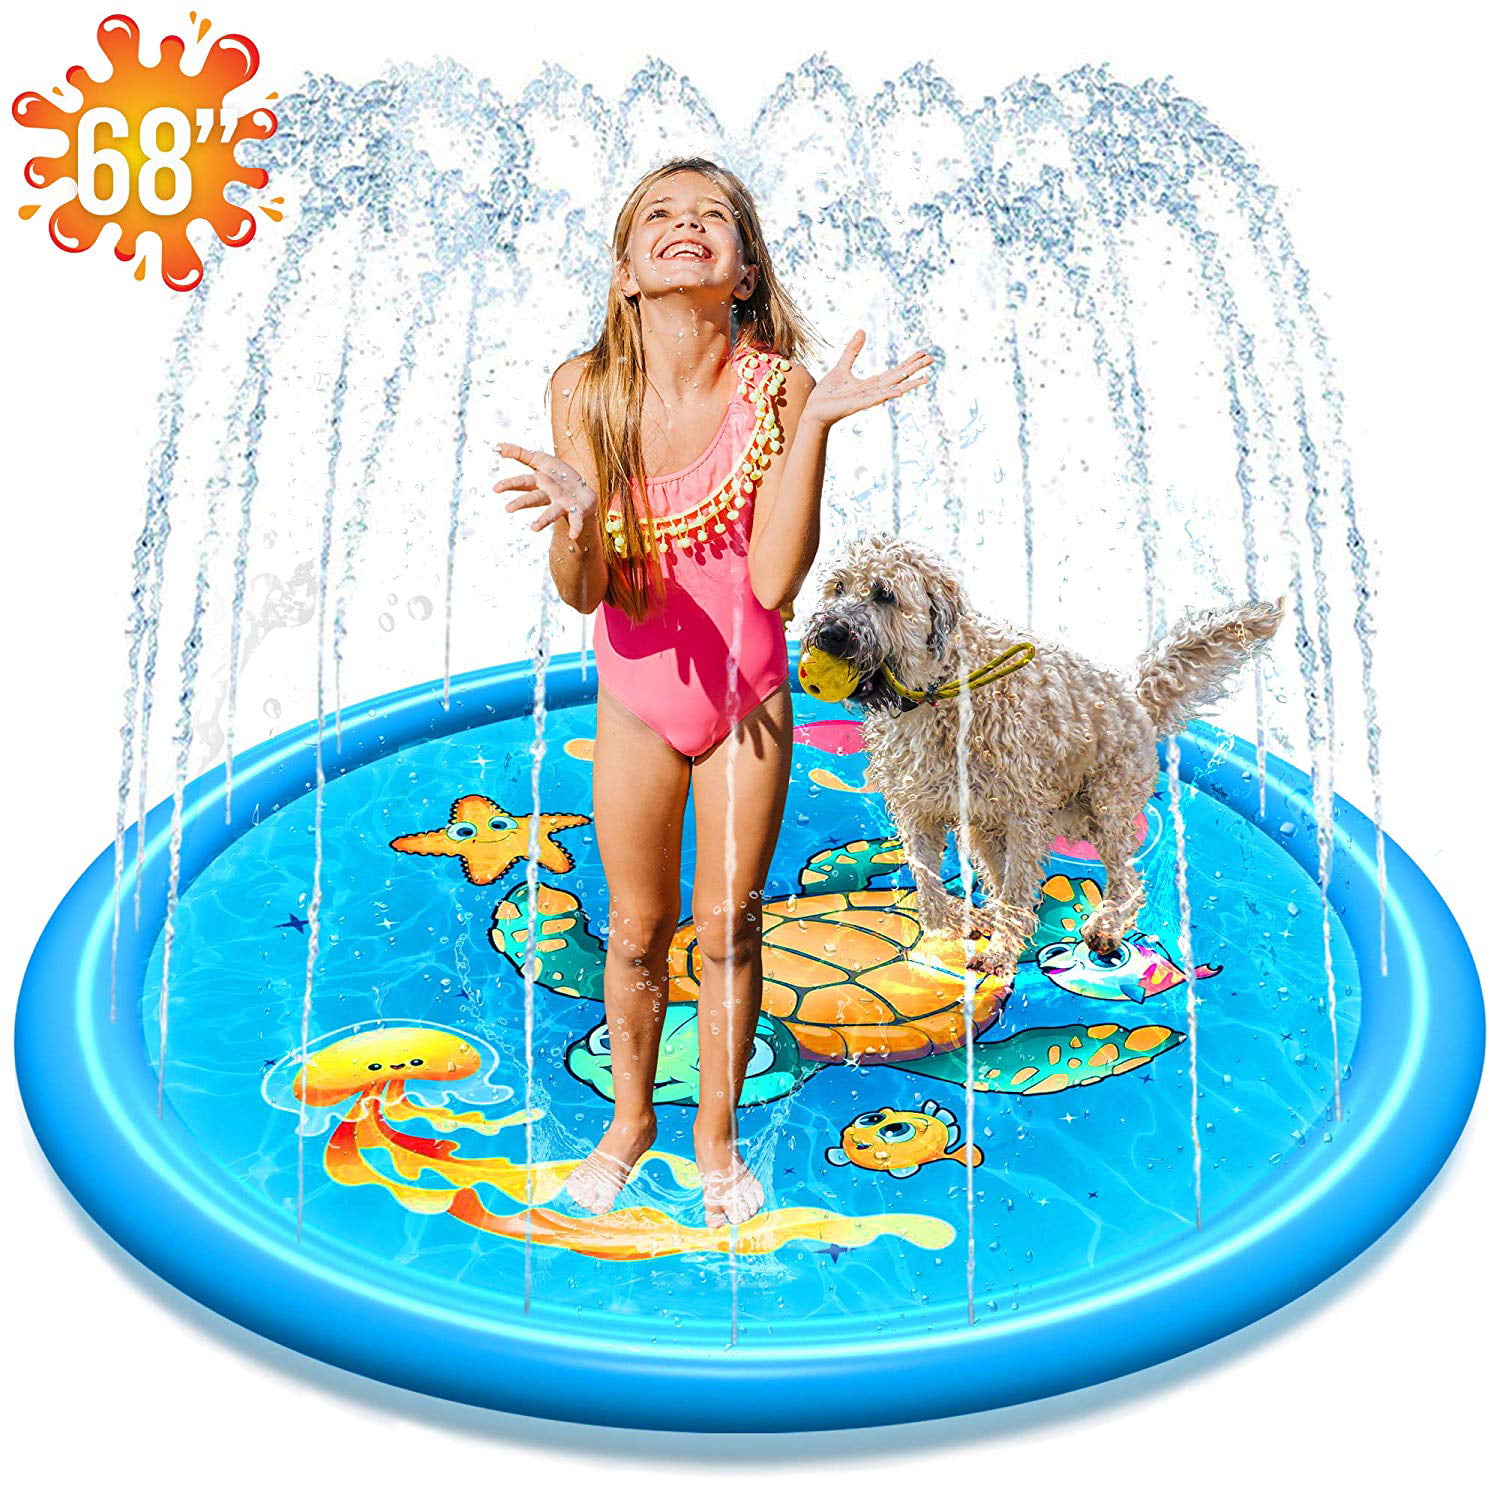 Summer Essential Spray Toys for Kids and Outdoor Garden Family Activities OOFAJ 68 Inches Splash Water Play Mat,Splash Pad Durable Portable Inflatable Sprinkler Pad Sprinkle Wading Pool